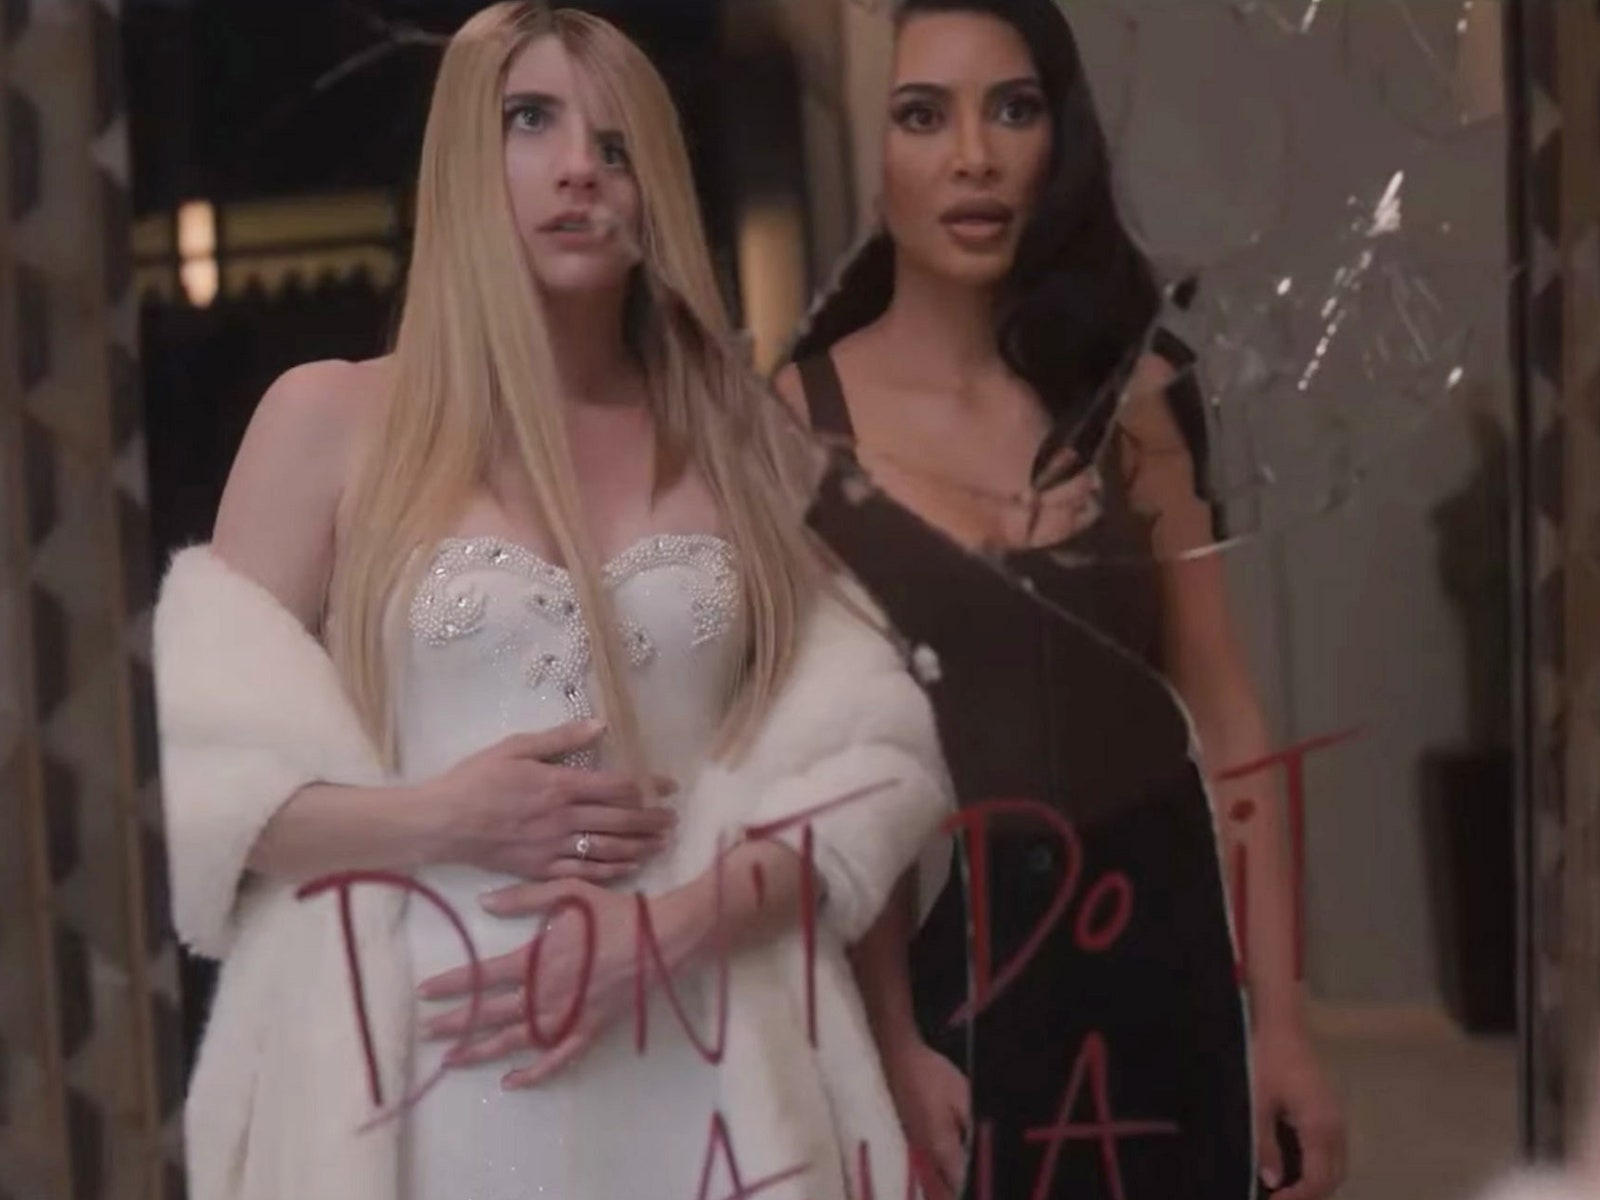 American Horror Story: Delicate has terrifying parallels to the state of British maternity care (especially the lack of weight given to mothers’ voices)